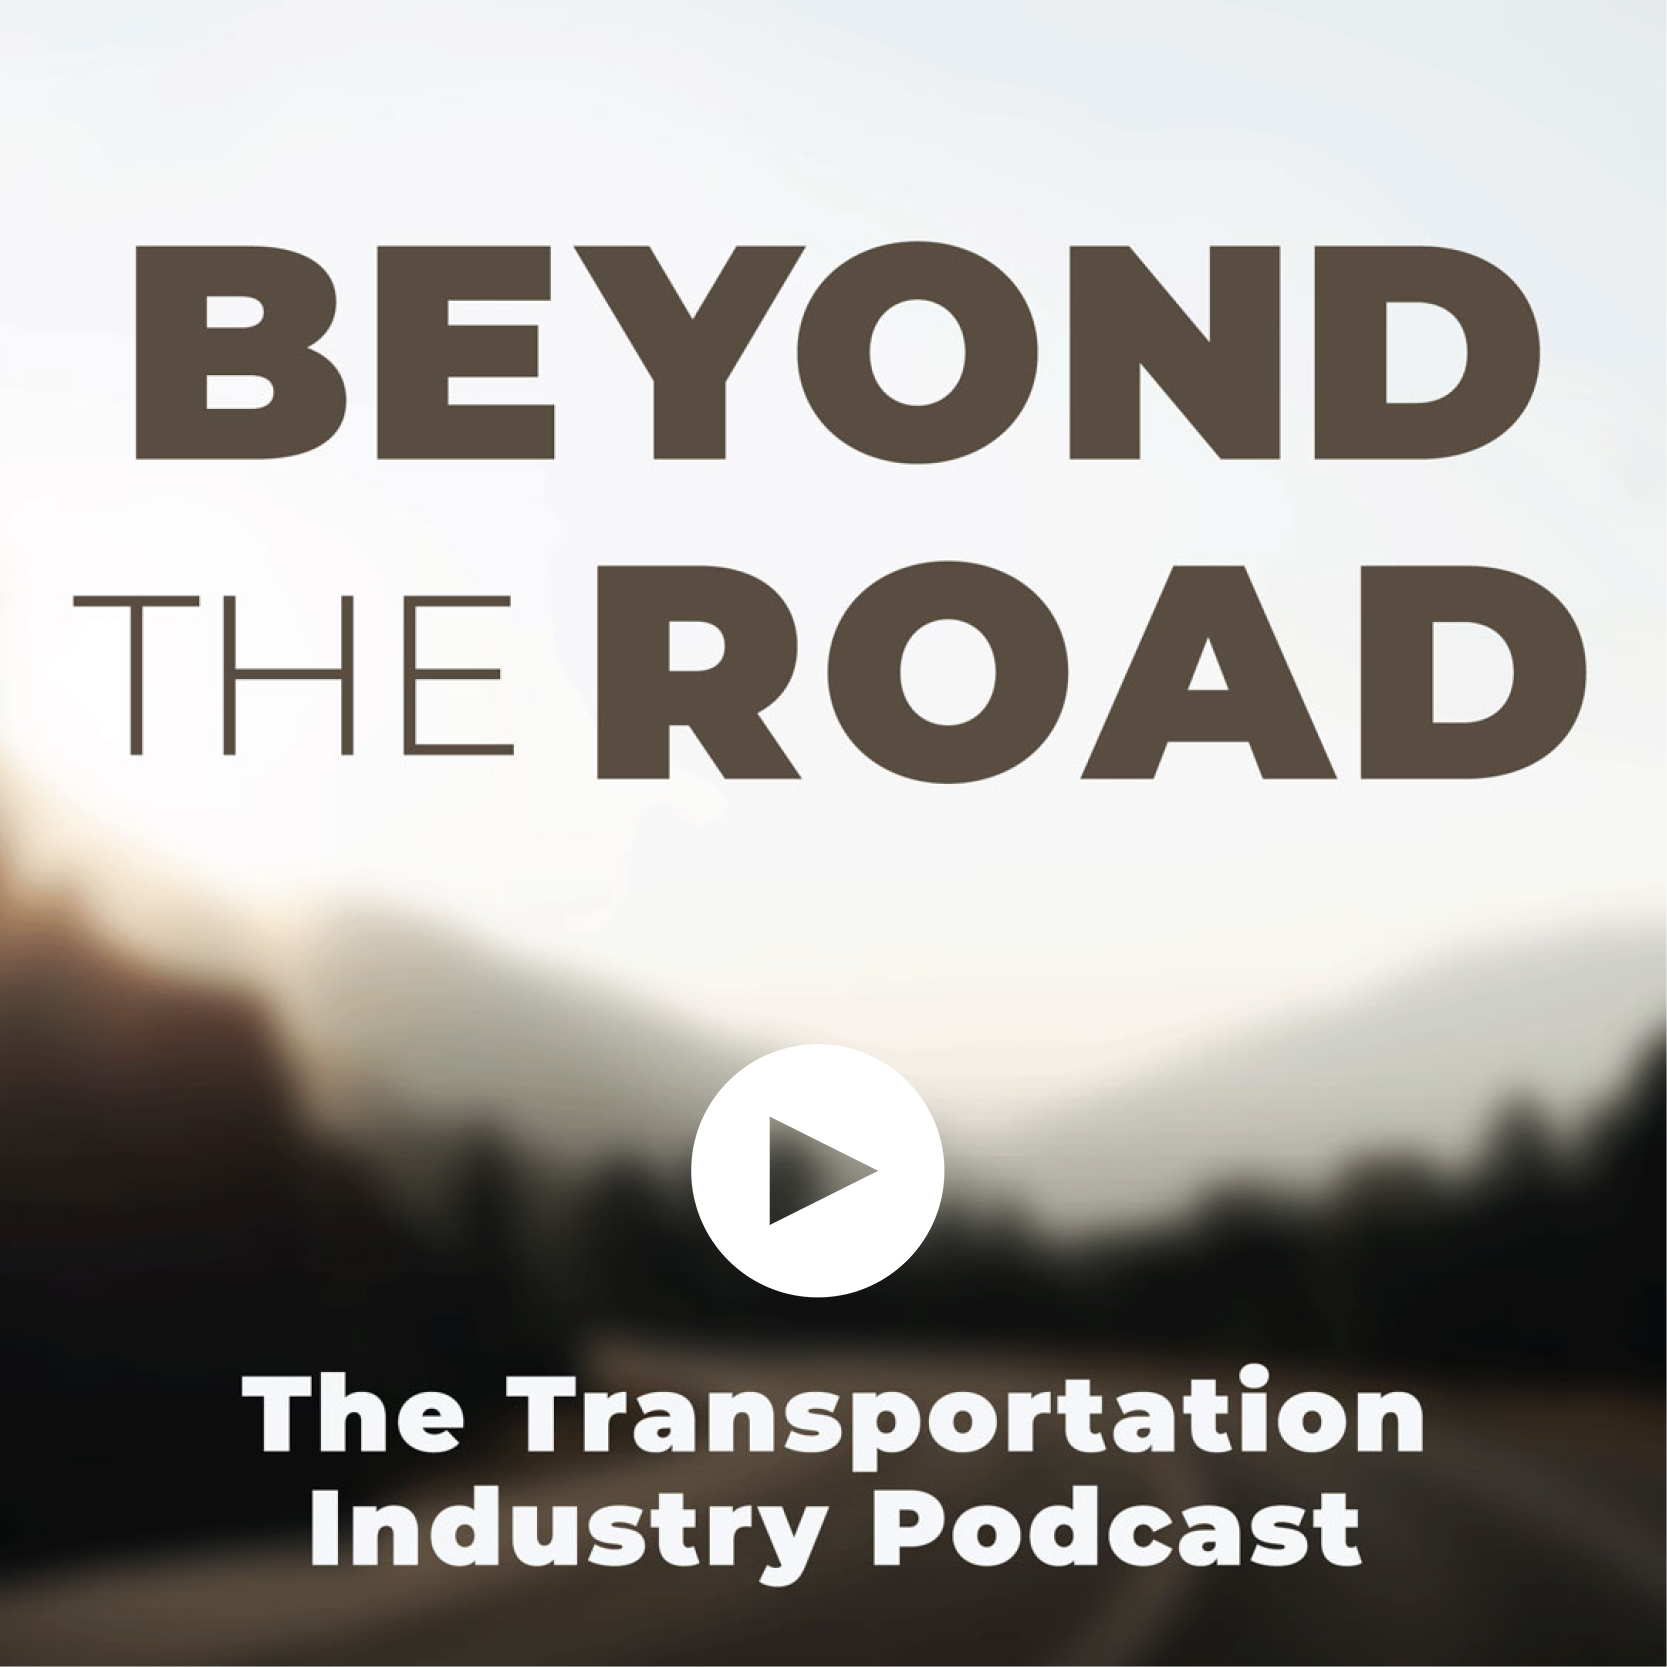 Our “Beyond the Road” Podcast Episode Covering All Things Freight Brokerage